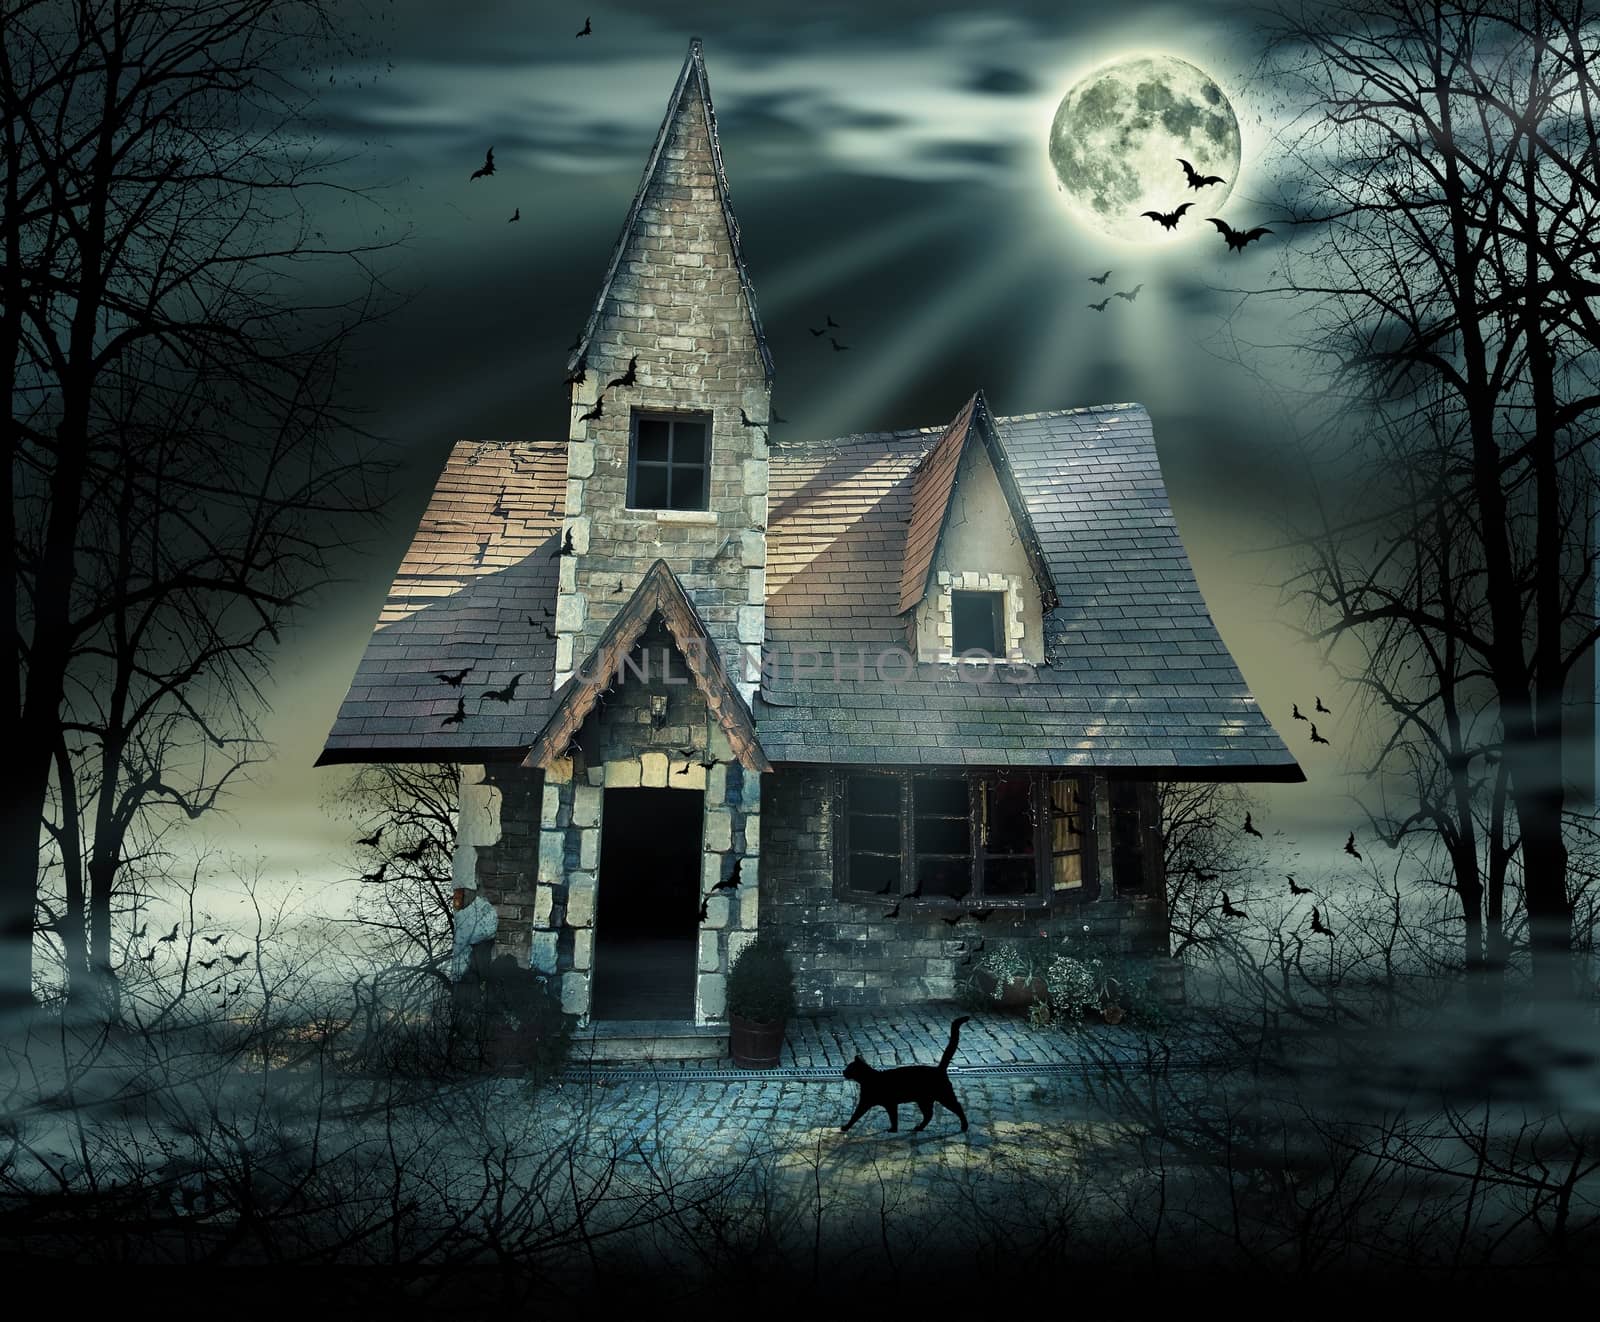 Haunted house by twindesigner